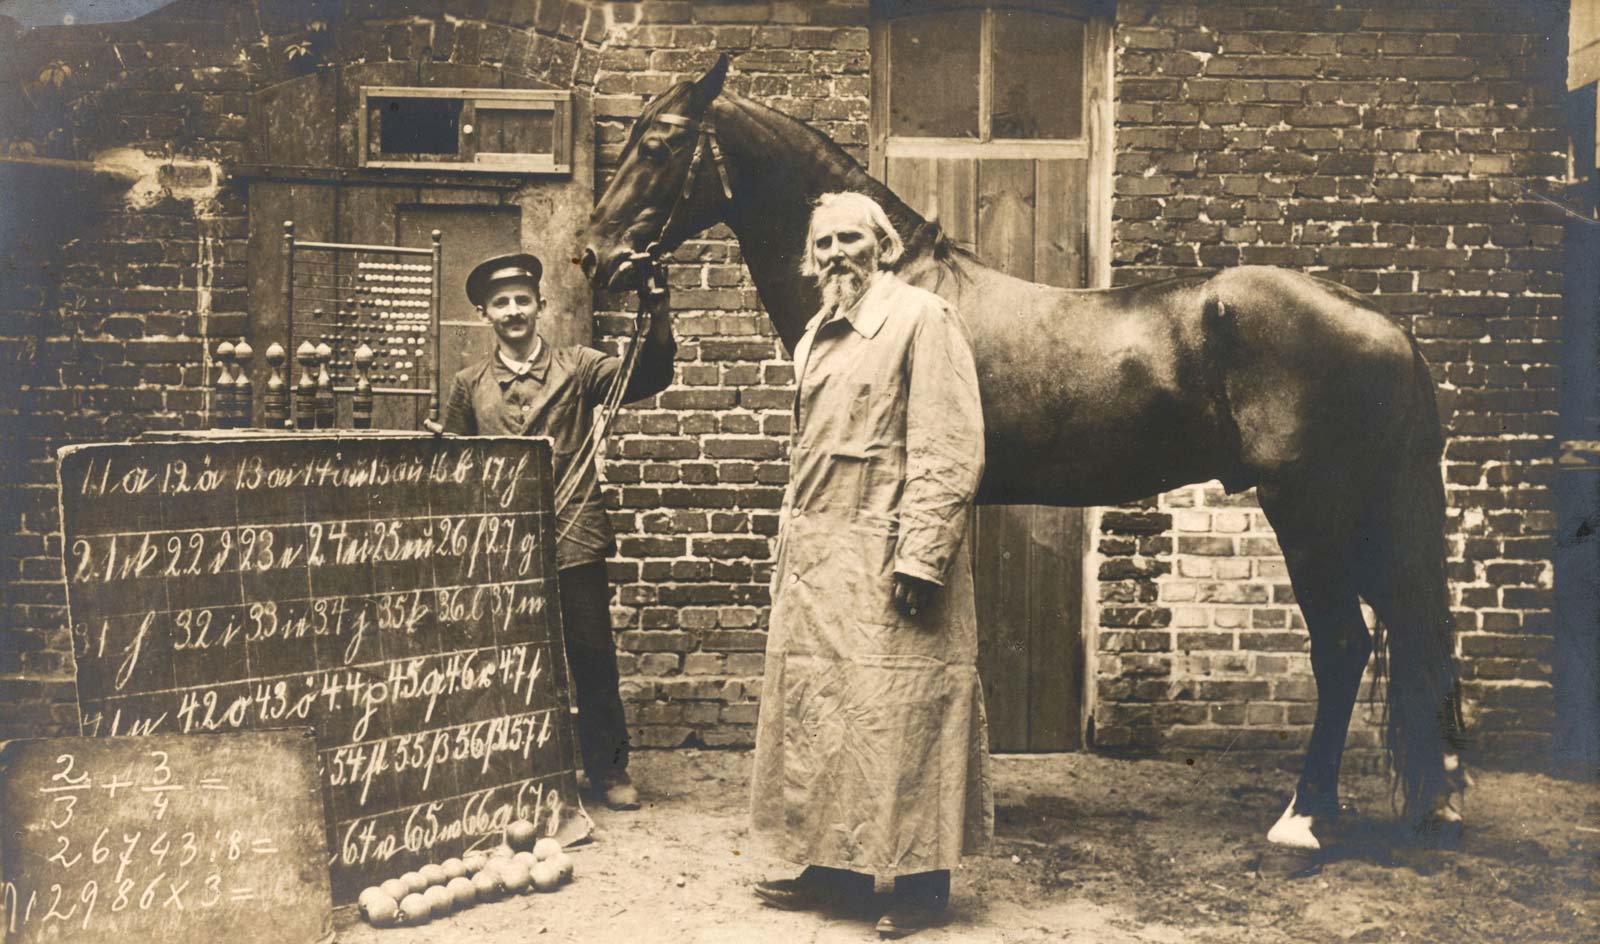 Clever Hans with his owner in a black and white photo